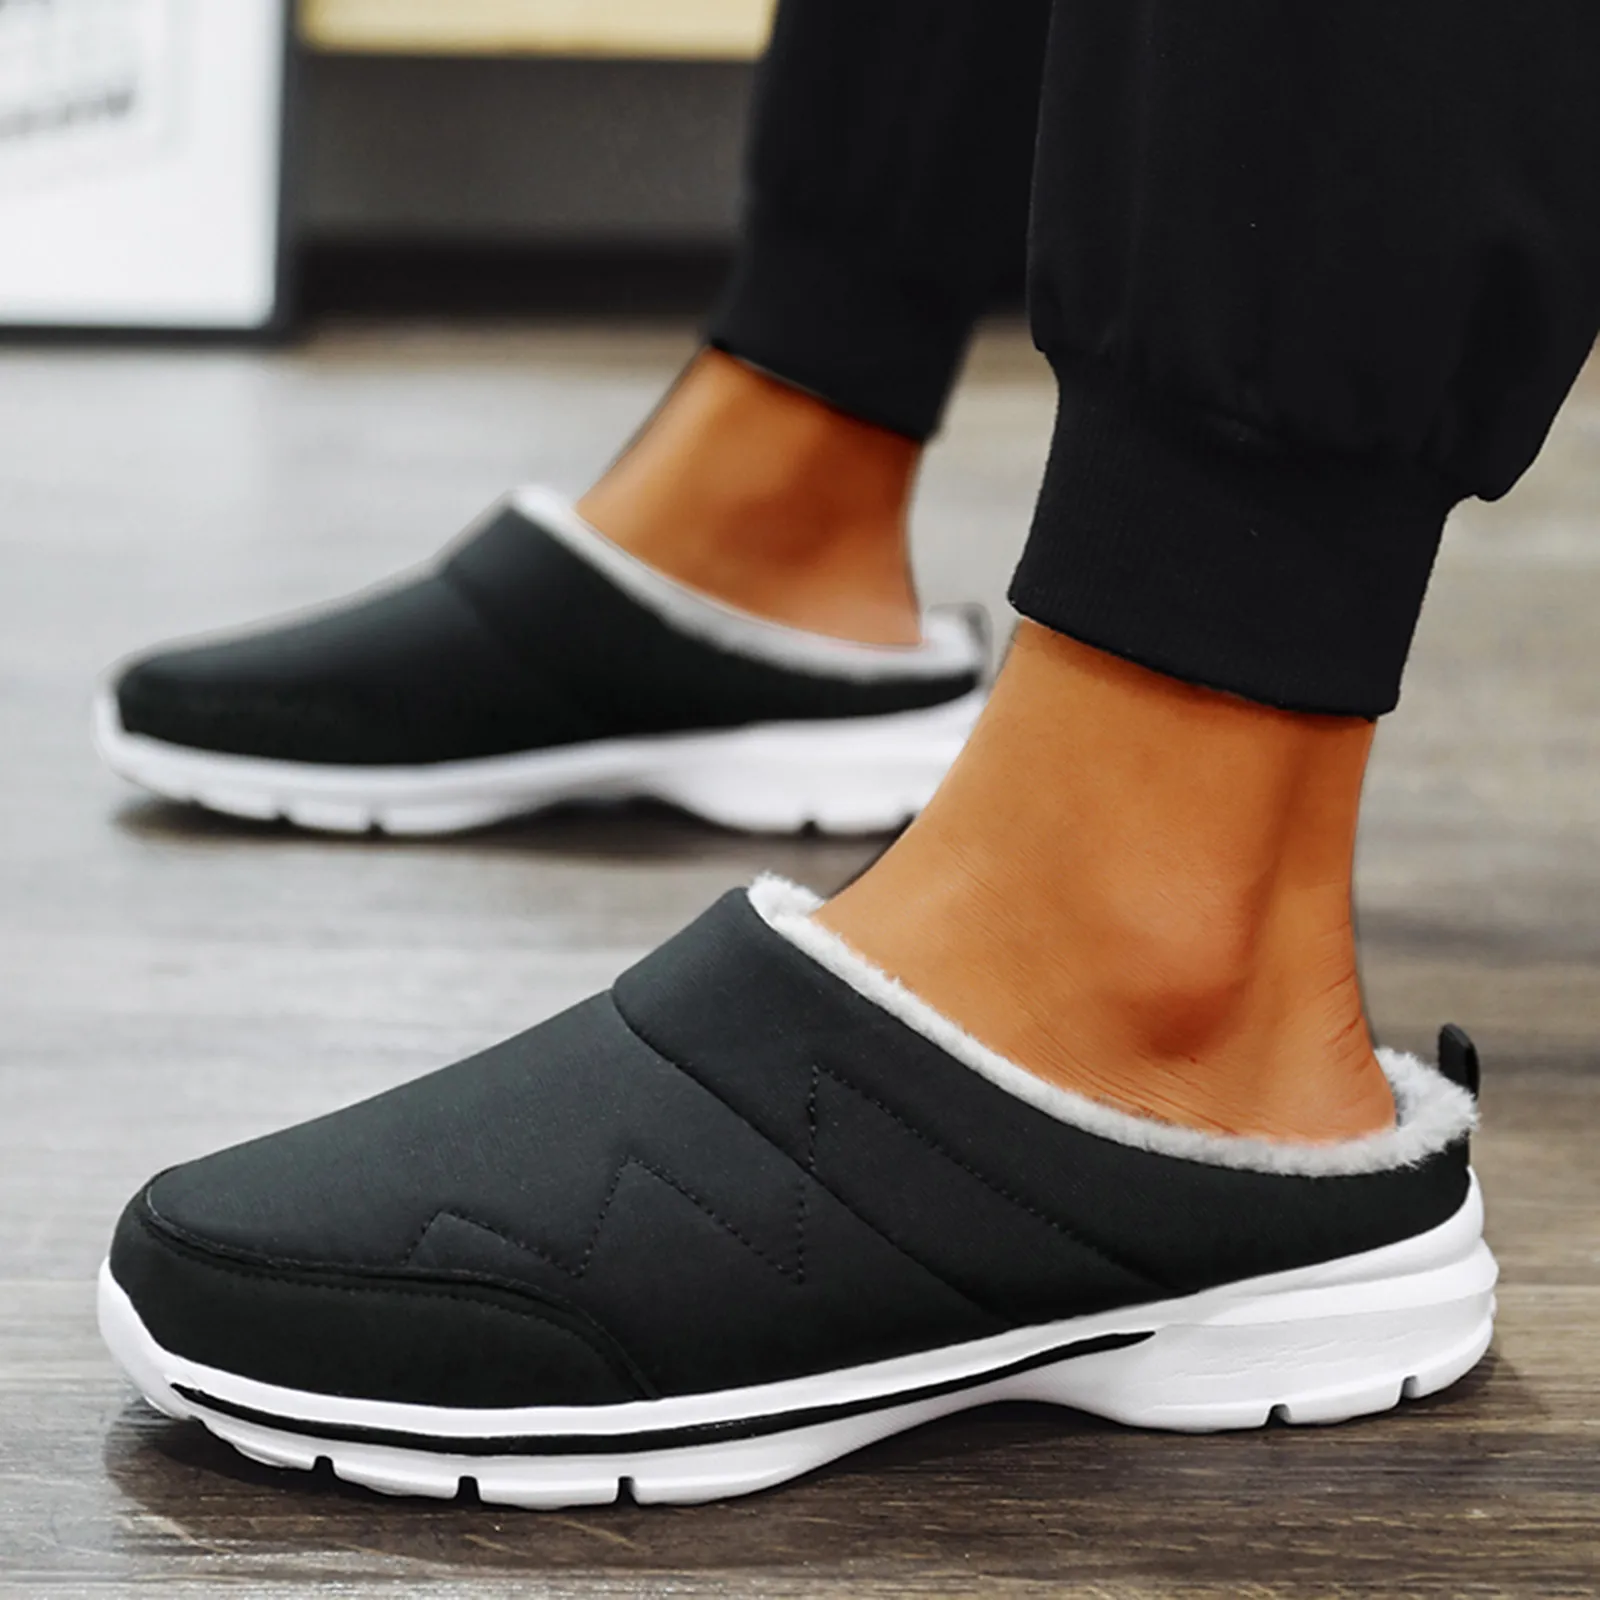 

2023 Lovers Shoes Mens'sSlippers Casual BreathableMesh Fabric Plus Velvet Warmth Slip On Shoes For Men Non-slip Soft Plush Shoes